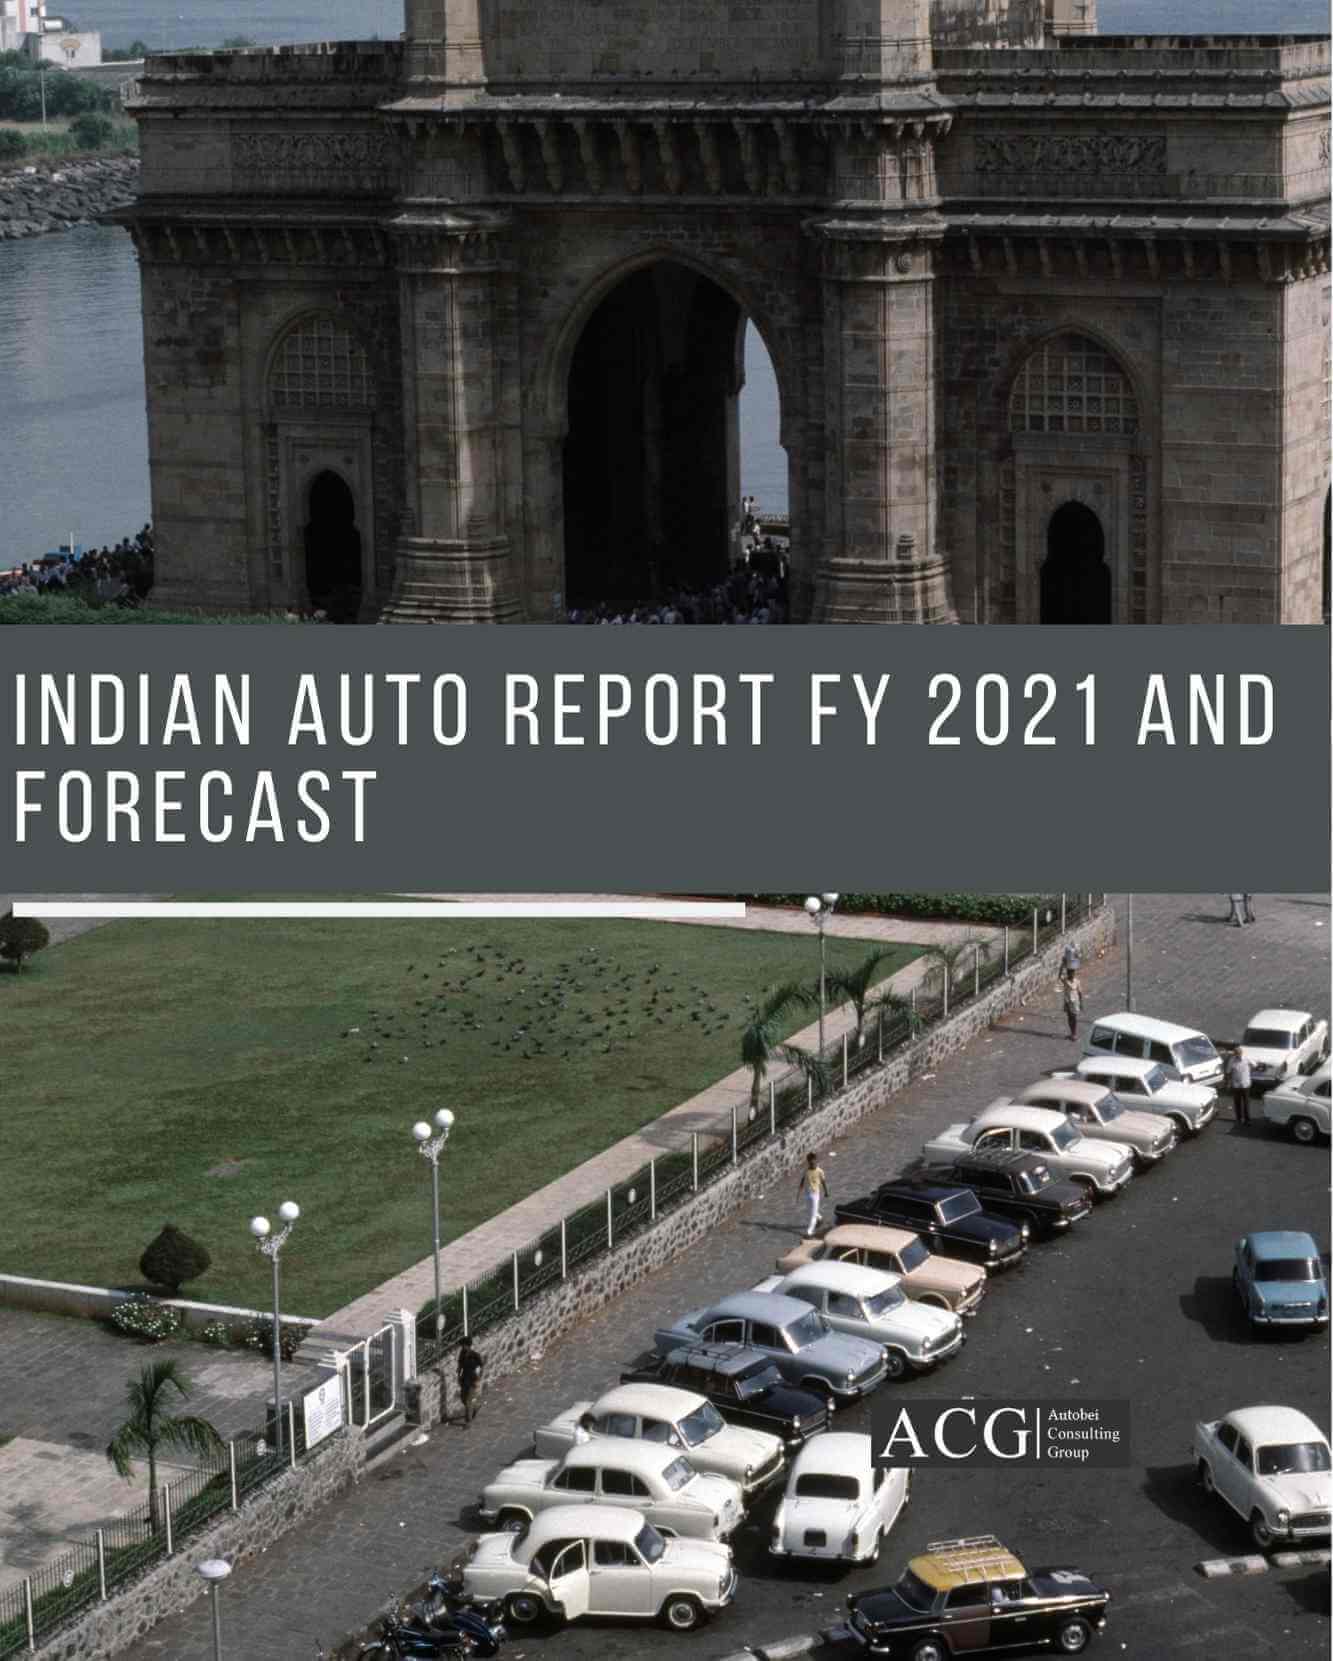 Indian Auto Report FY 2021 and Forecast